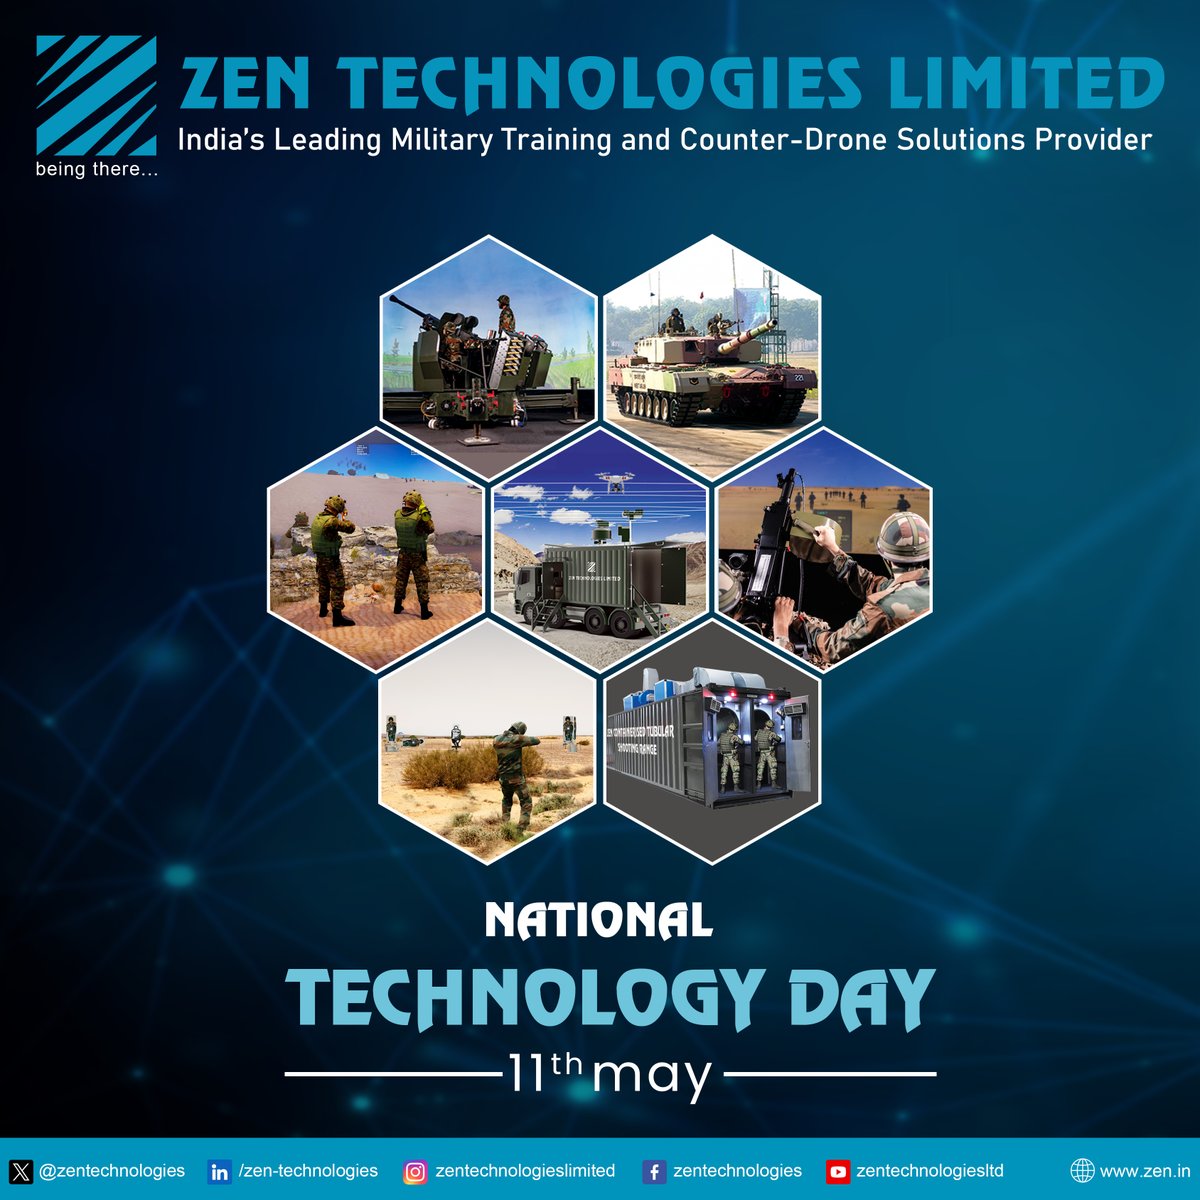 National Technology Day ! @ZenTechnologies remains steadfast in dedication to address the rigorous #training requirements of Defence forces worldwide. With #Indigenously developed Zen’s state-of-the-art Combat Training solutions and Counter-Drone Solutions, we empower #Defence